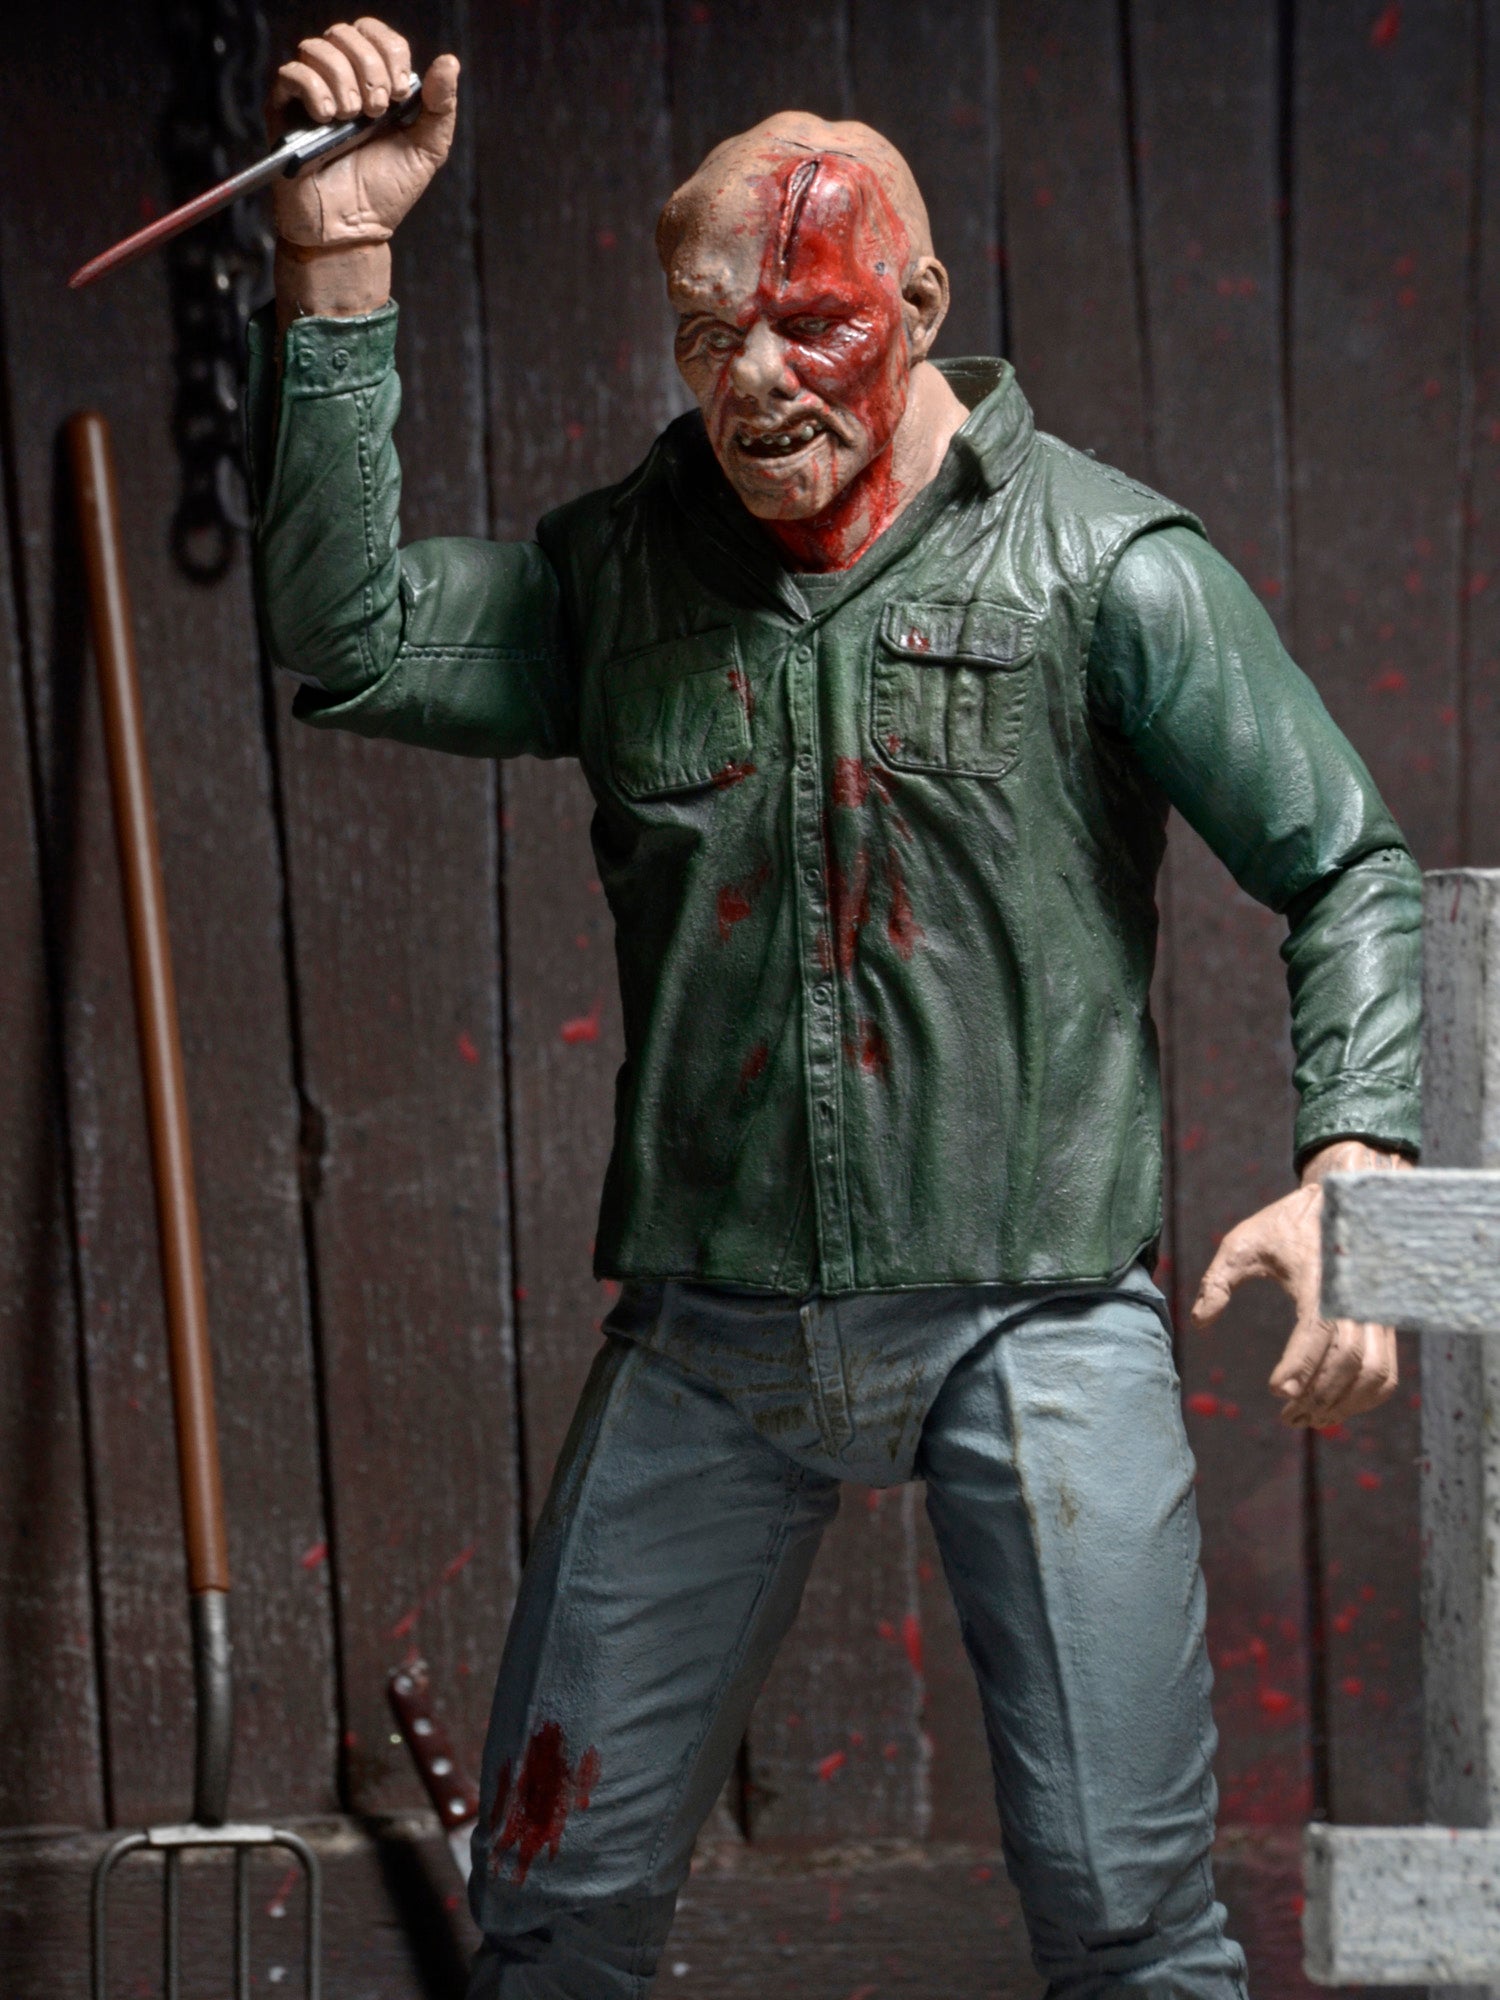 NECA - Friday the 13th - 7" Action Figure - Ultimate Part 3 Jason - costumes.com